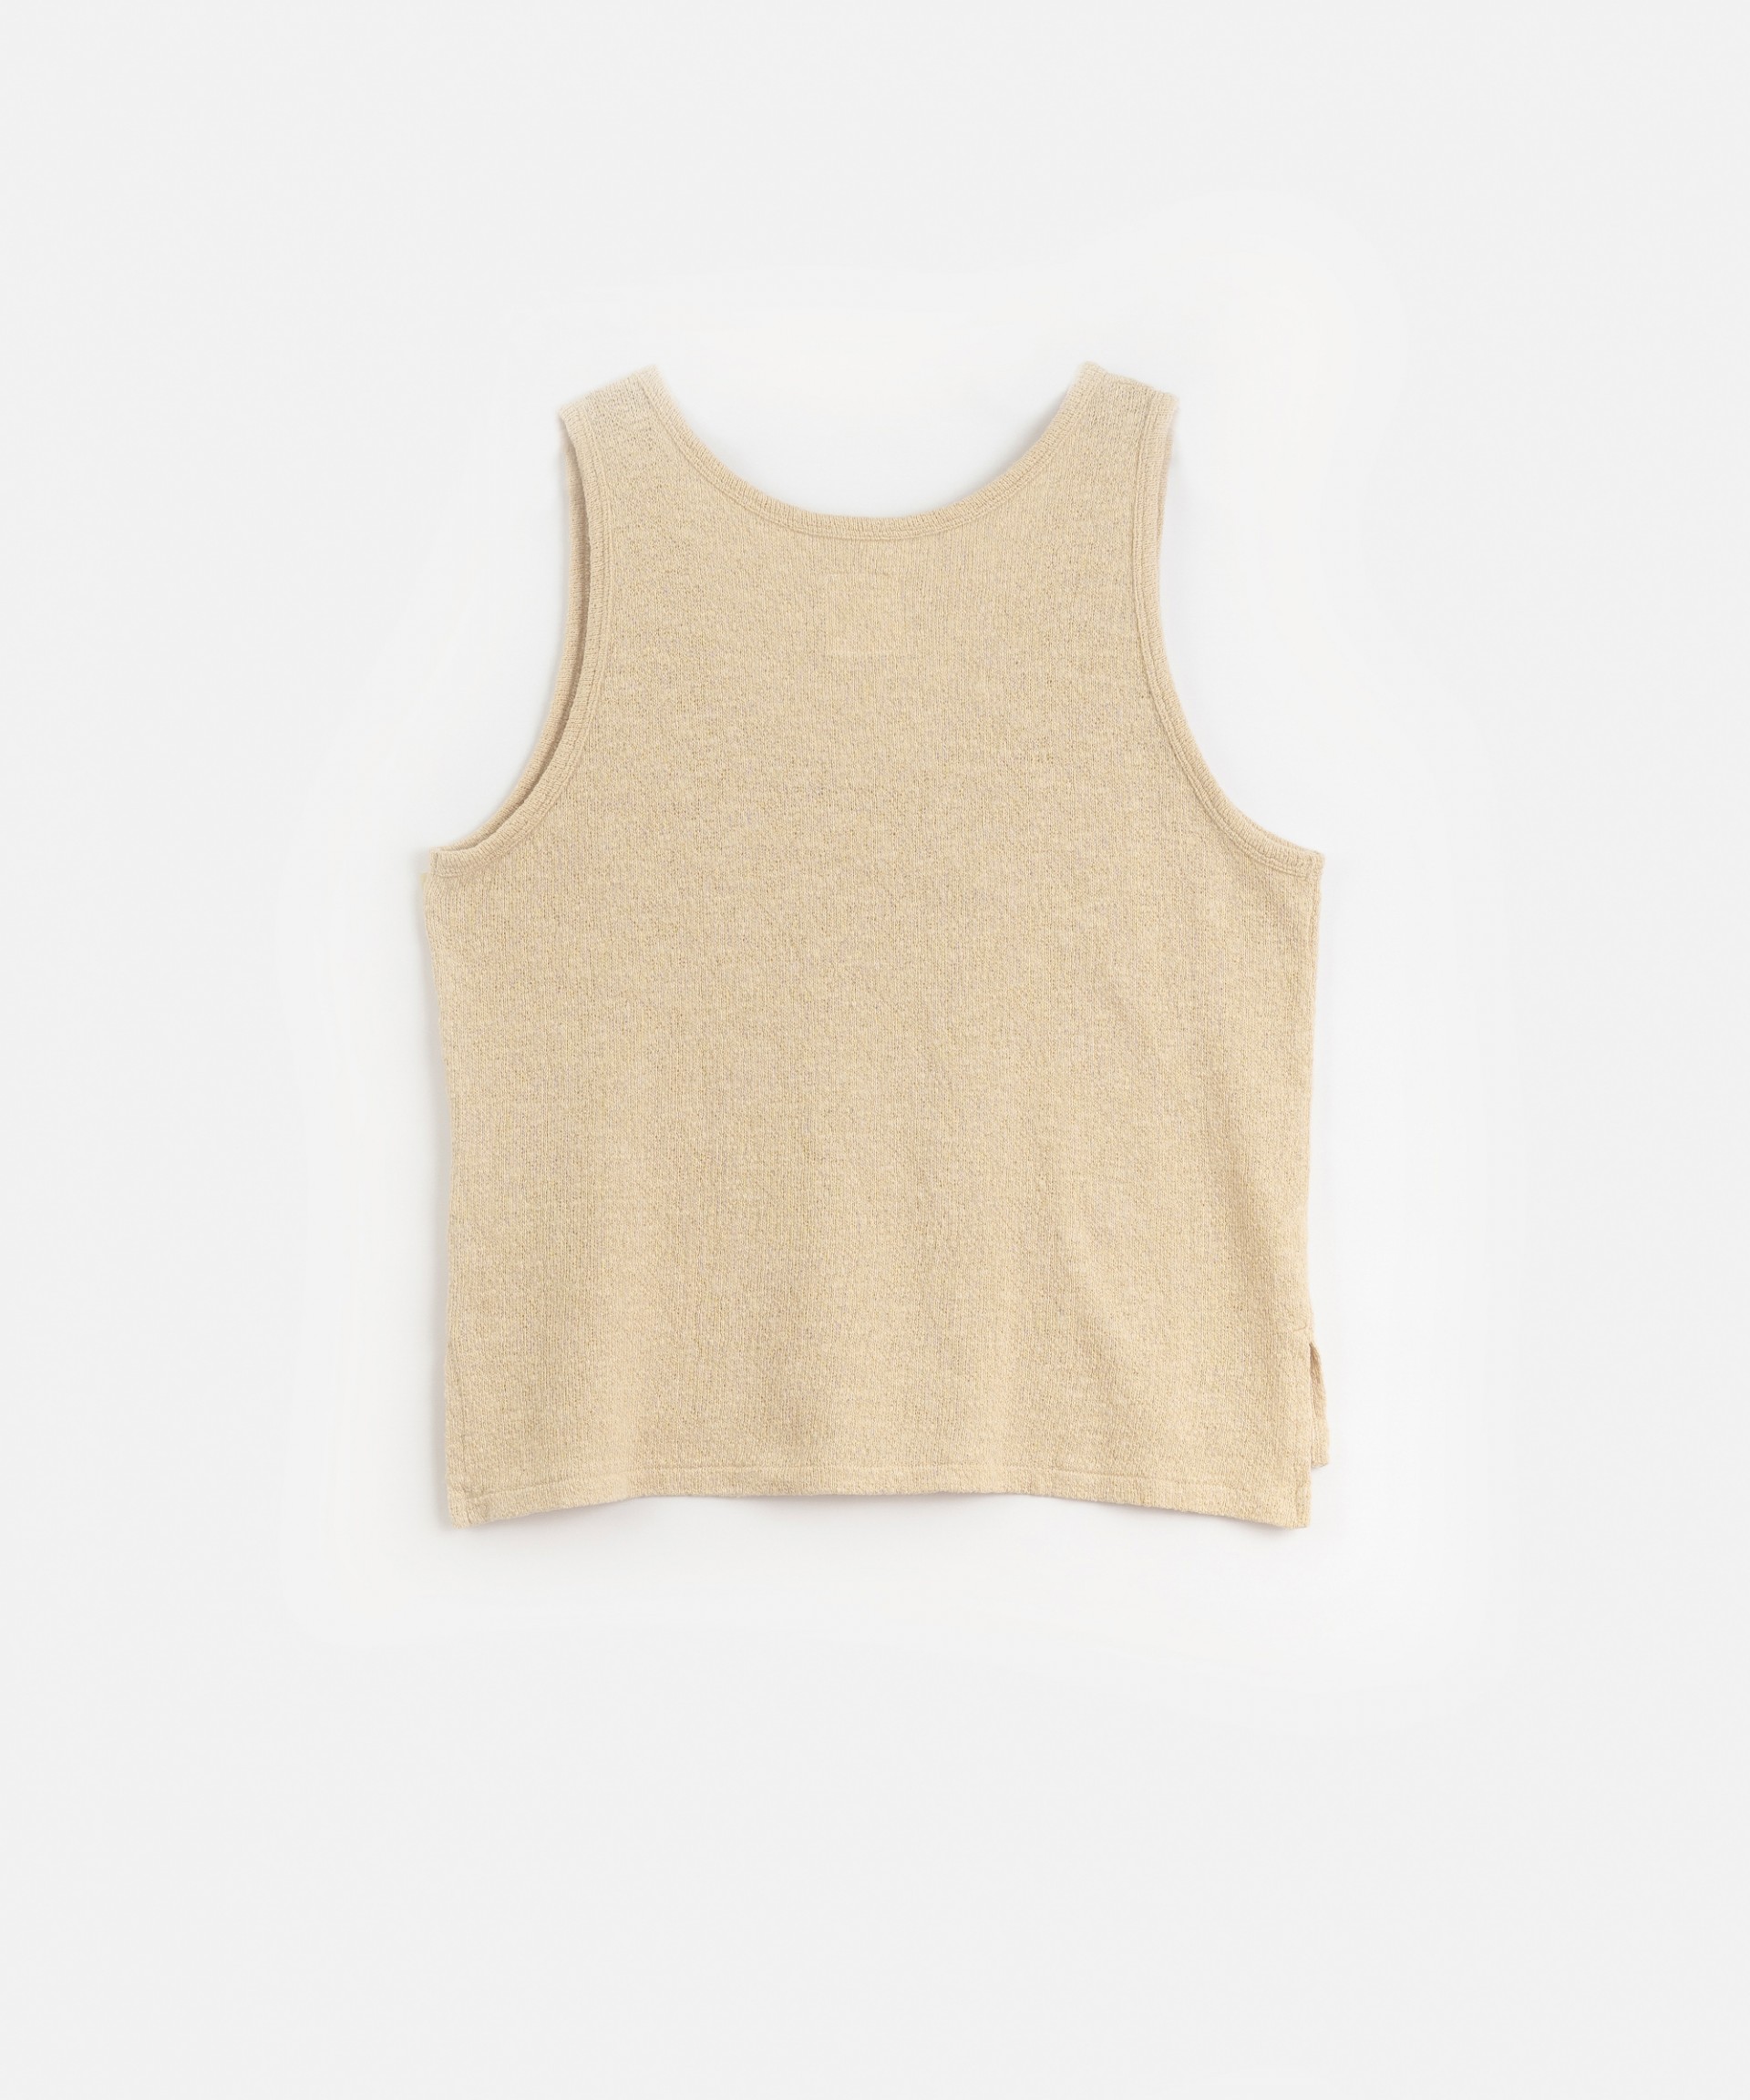 Top in jersey stitch cotton | Organic Care